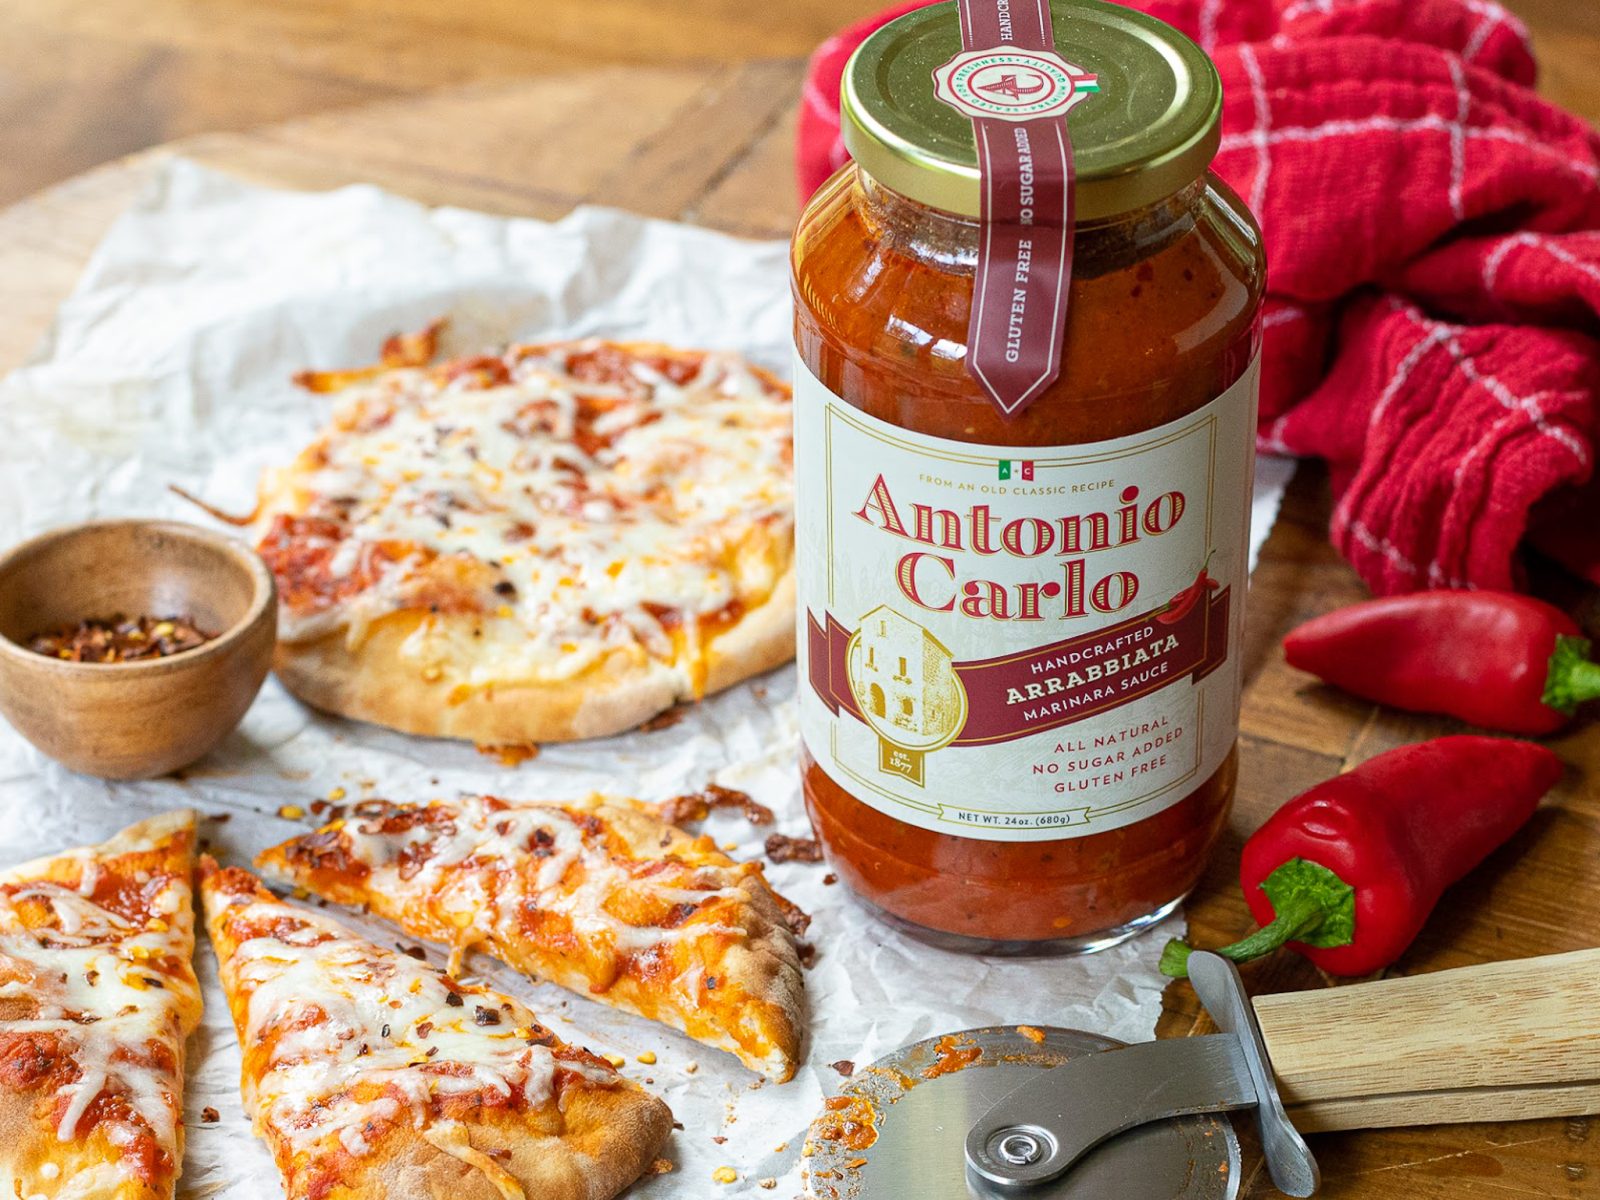 Grab Antonio Carlo Gourmet Pasta Sauce At Publix – Perfect For Those Busy Weekday Night Meals!